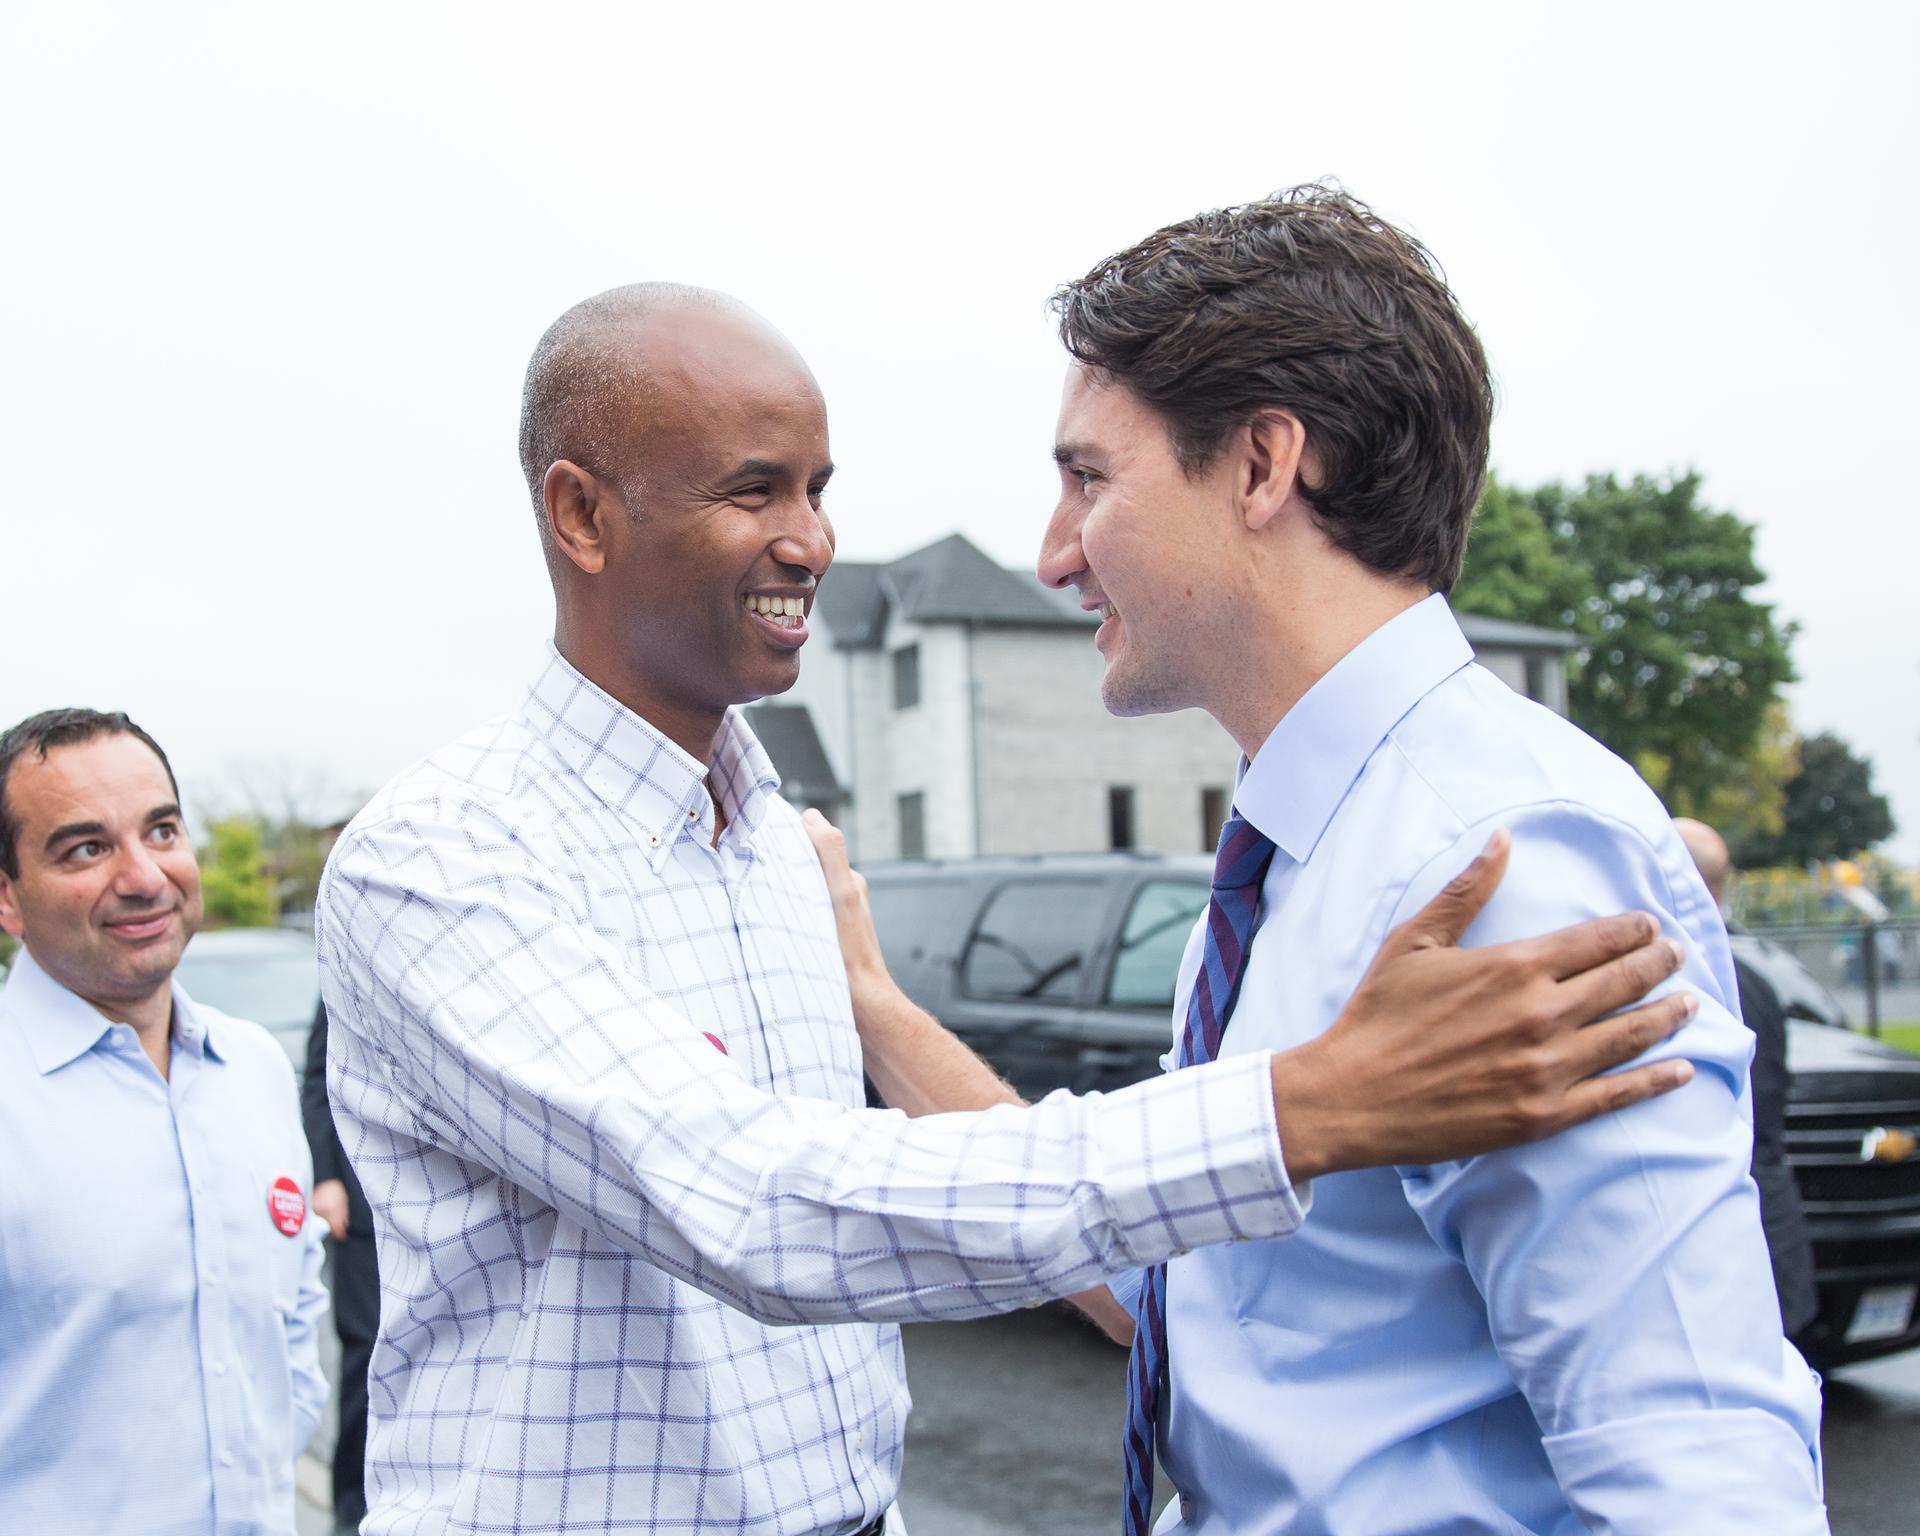 Justin Trudeau on the campaign trail, visiting then-candidate Ahmed Hussen in his Toronto district. Ahmed Hussen won the race, becoming Canada's first member of parliament of Somali descent. 